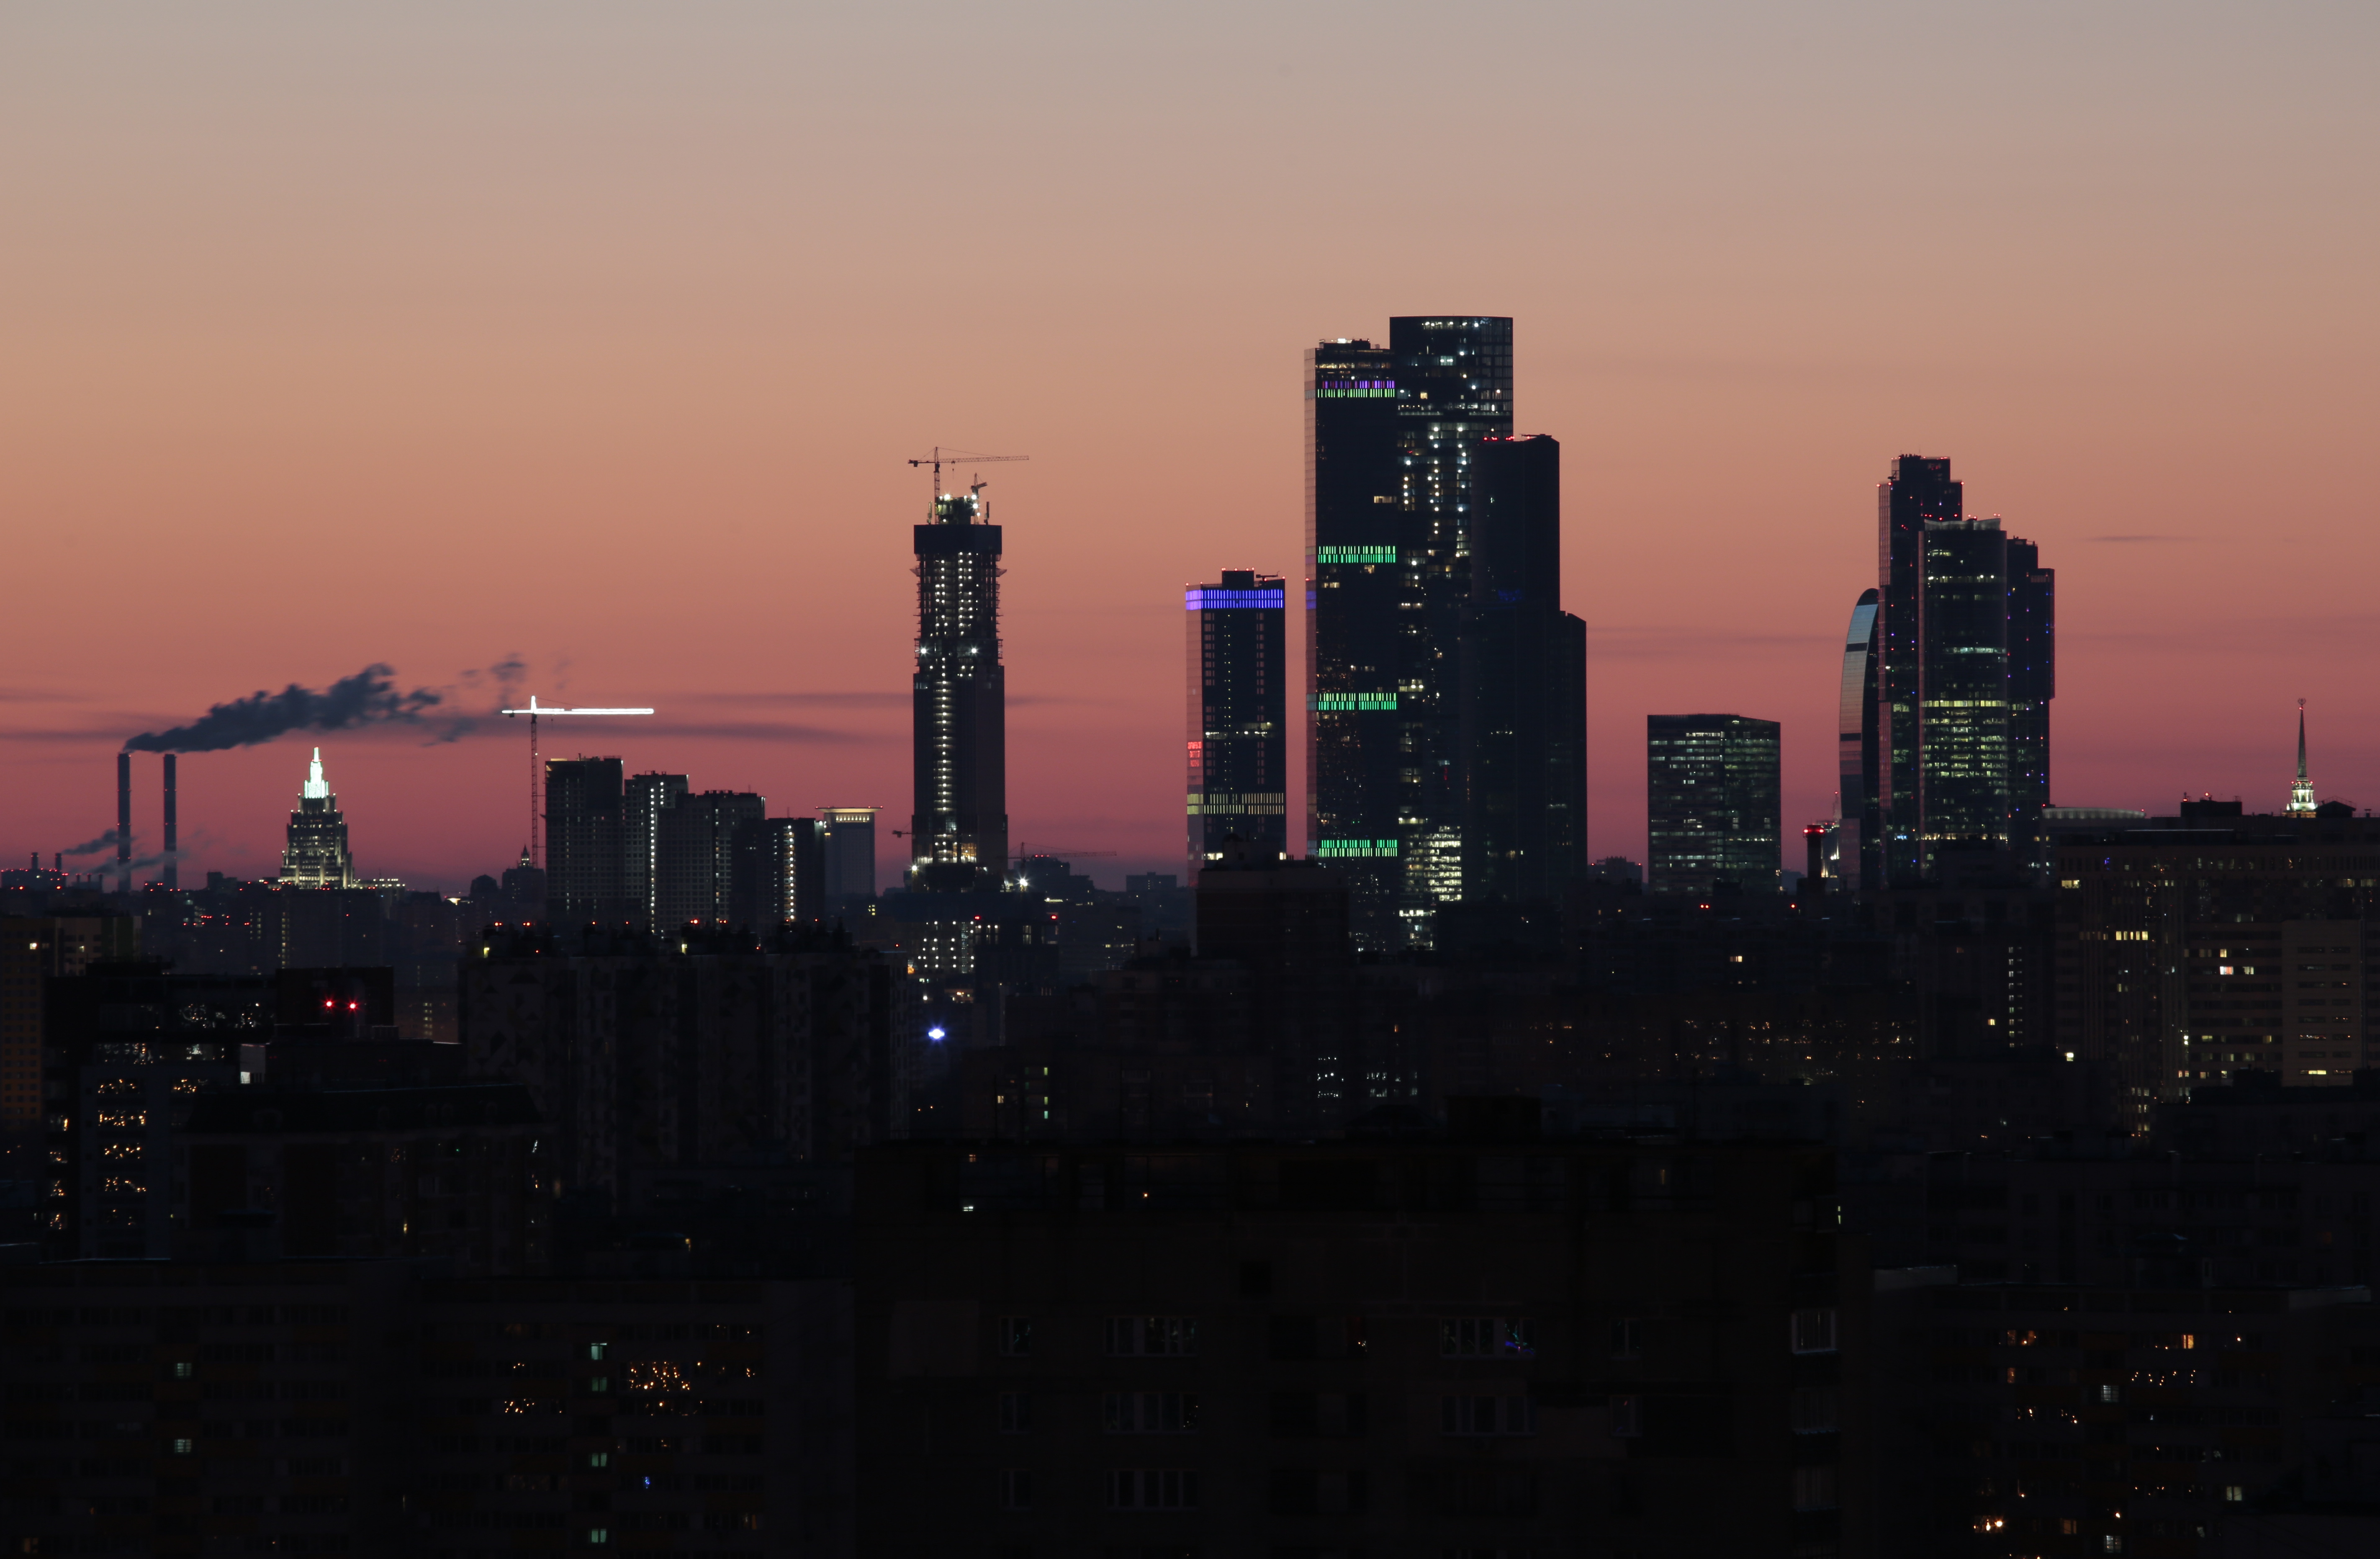 A general view shows the skyscrapers of the Moscow International Business Centre during sunrise in Moscow